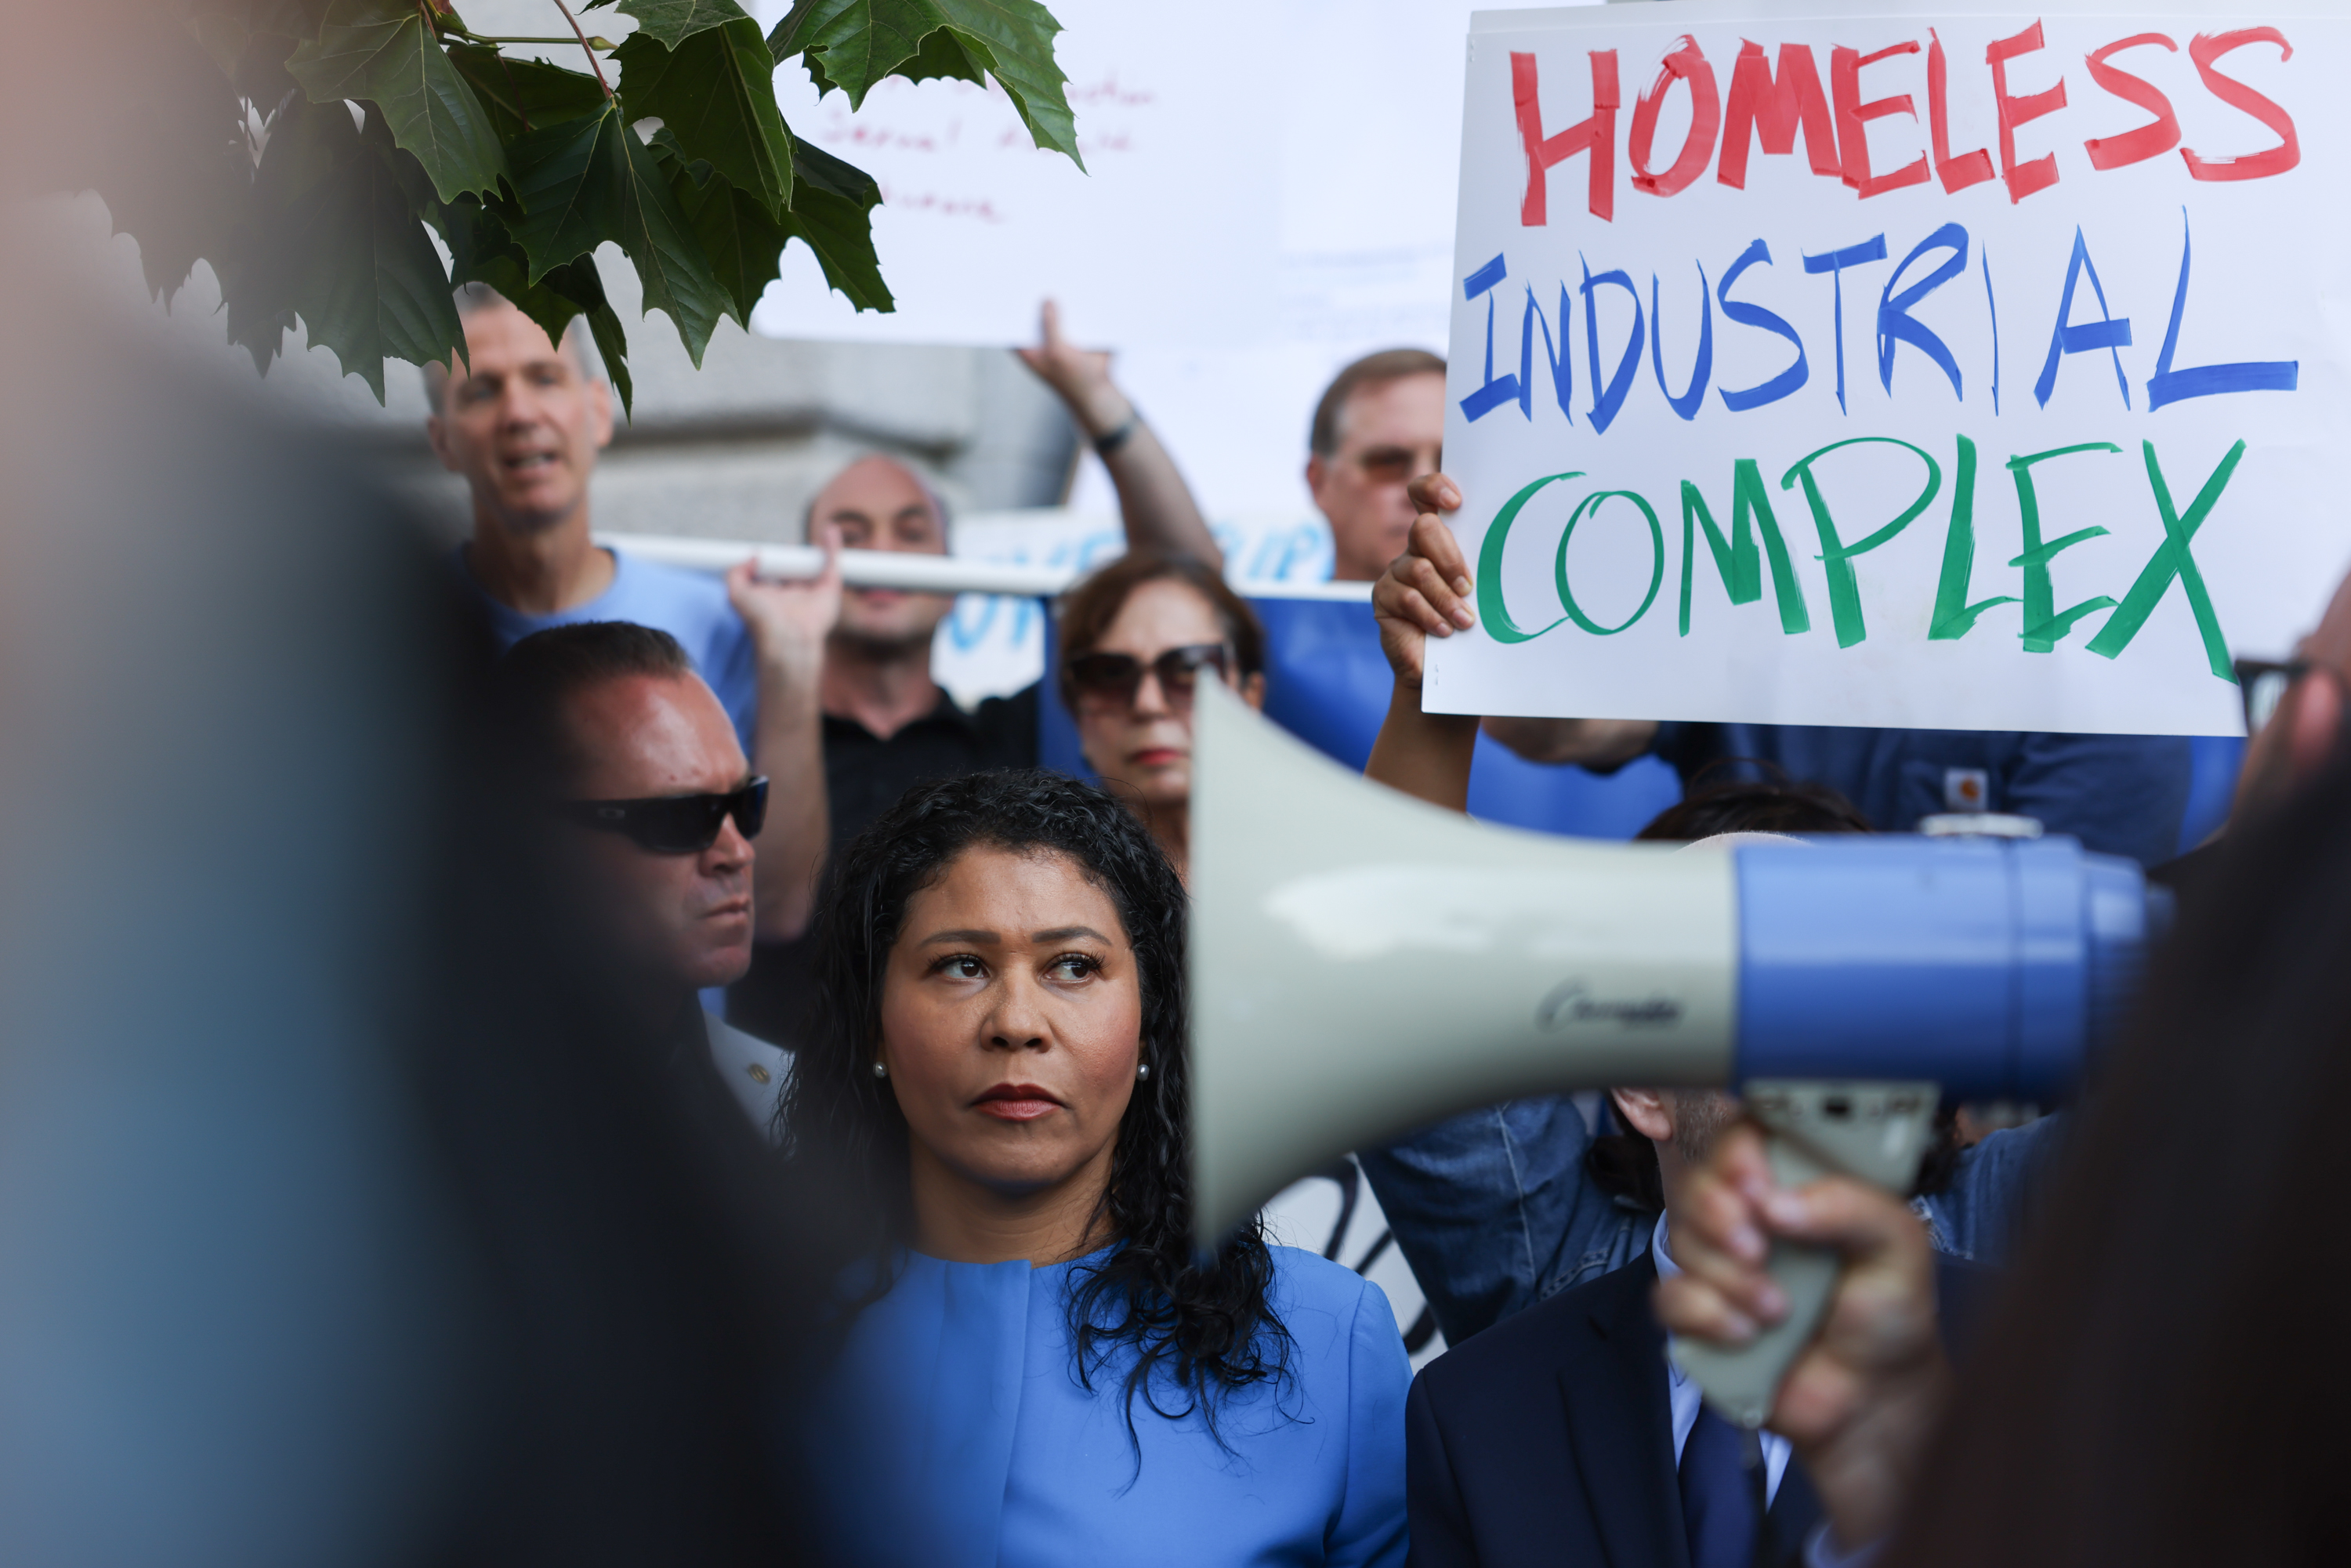 A woman with a megaphone is in focus with protesters and a &quot;HOMELESS INDUSTRIAL COMPLEX&quot; sign in the background.